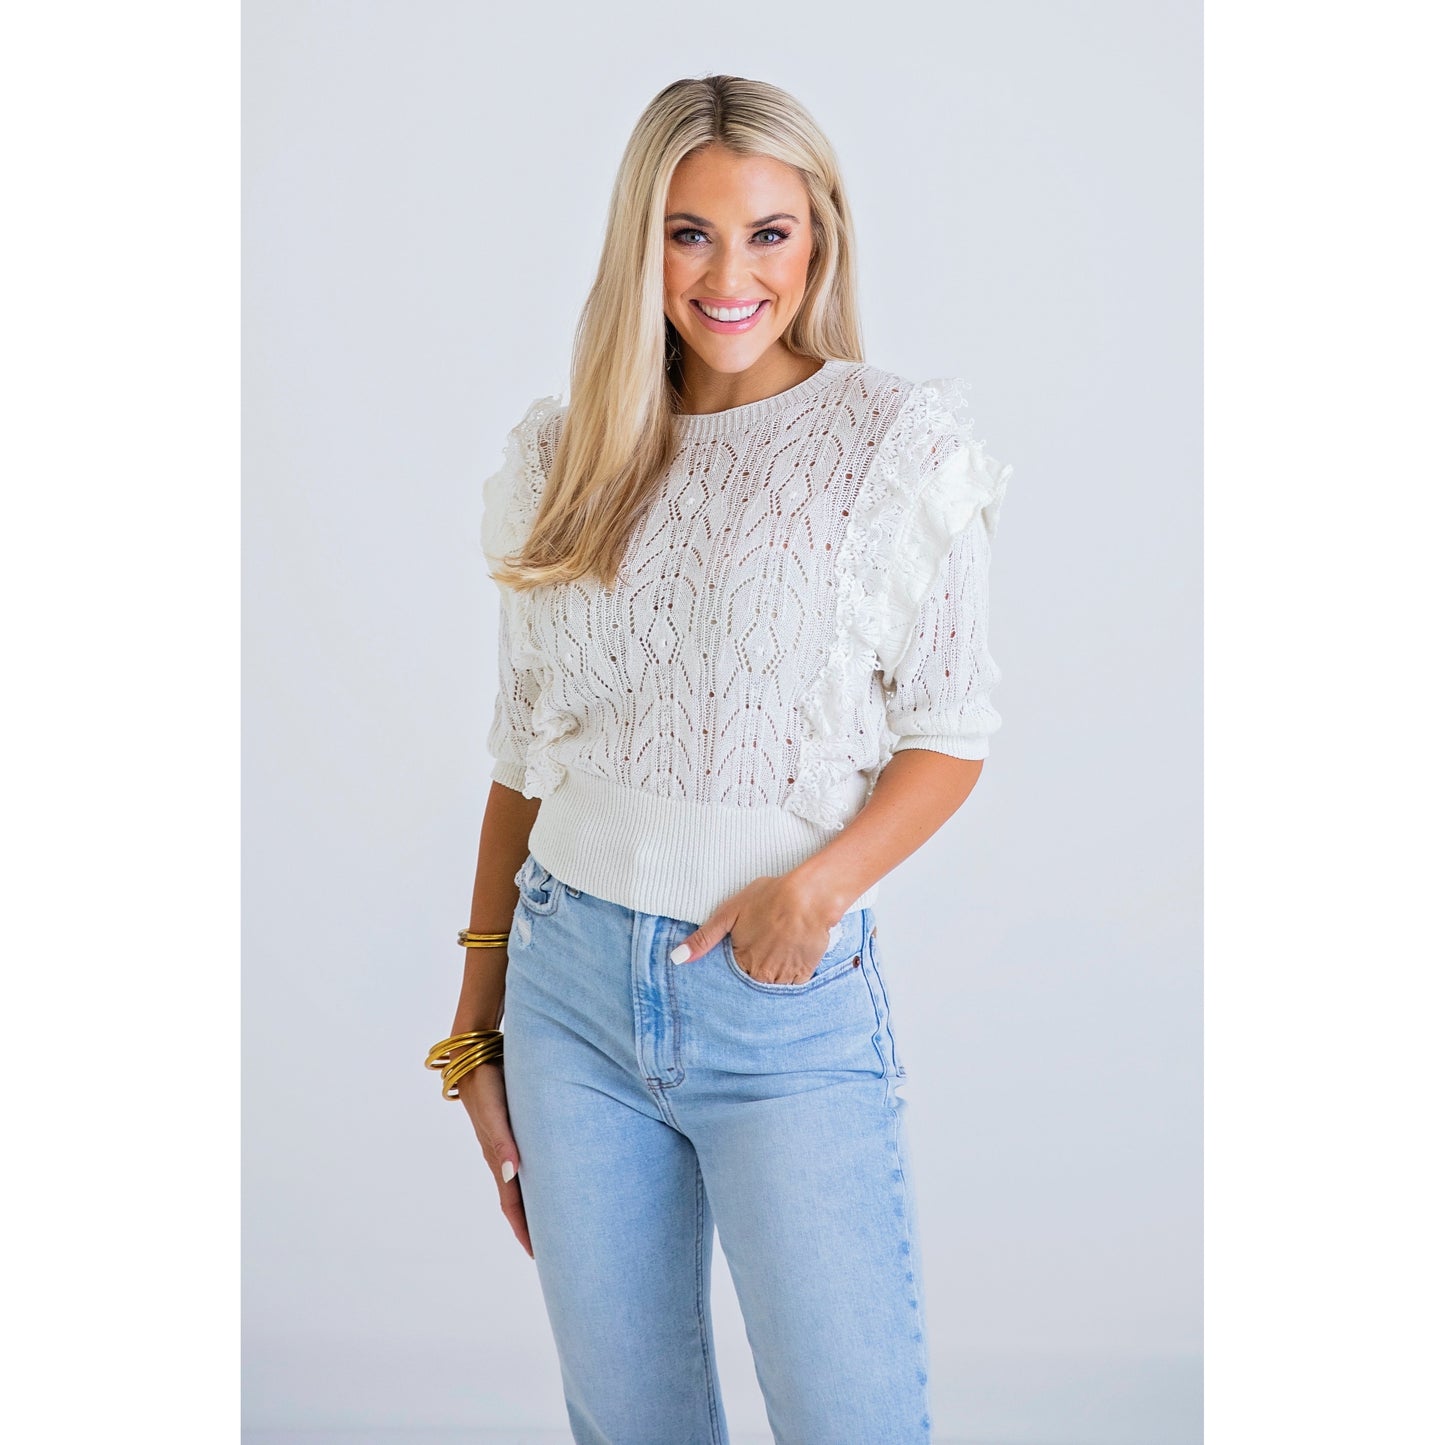 Solid Scoop Novelty Sweater in ivory